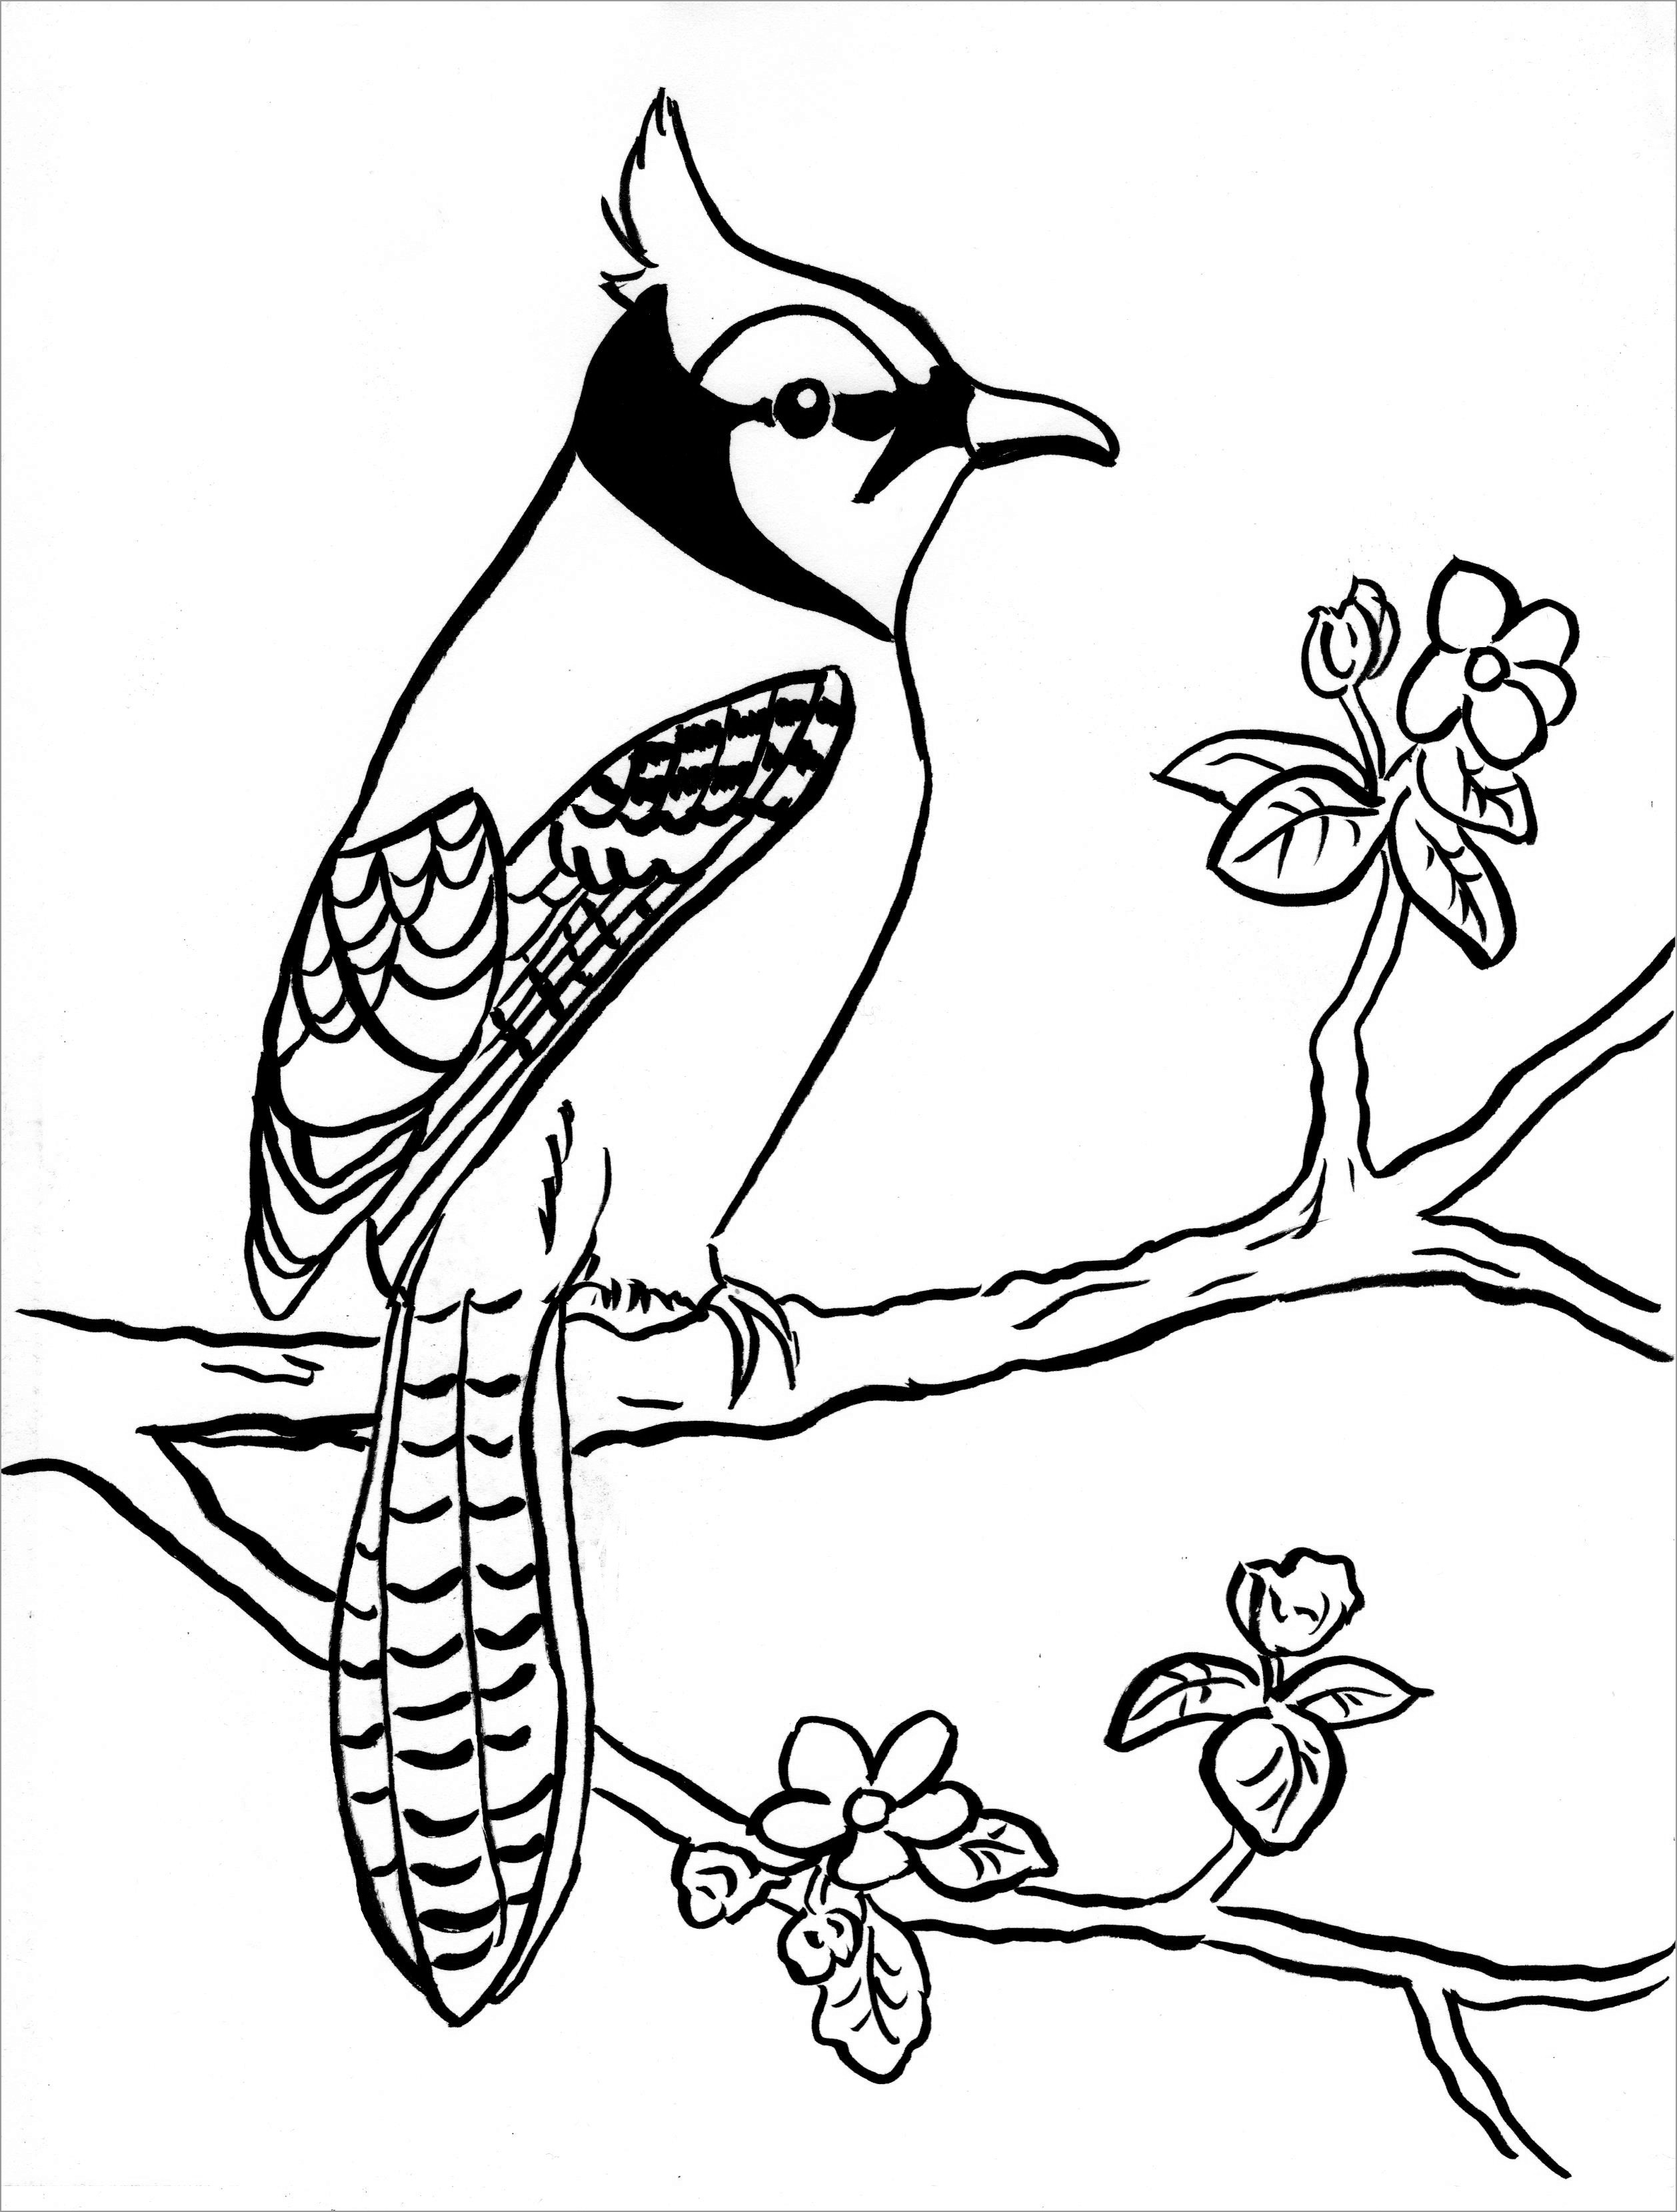 Jay Coloring Pages - ColoringBay